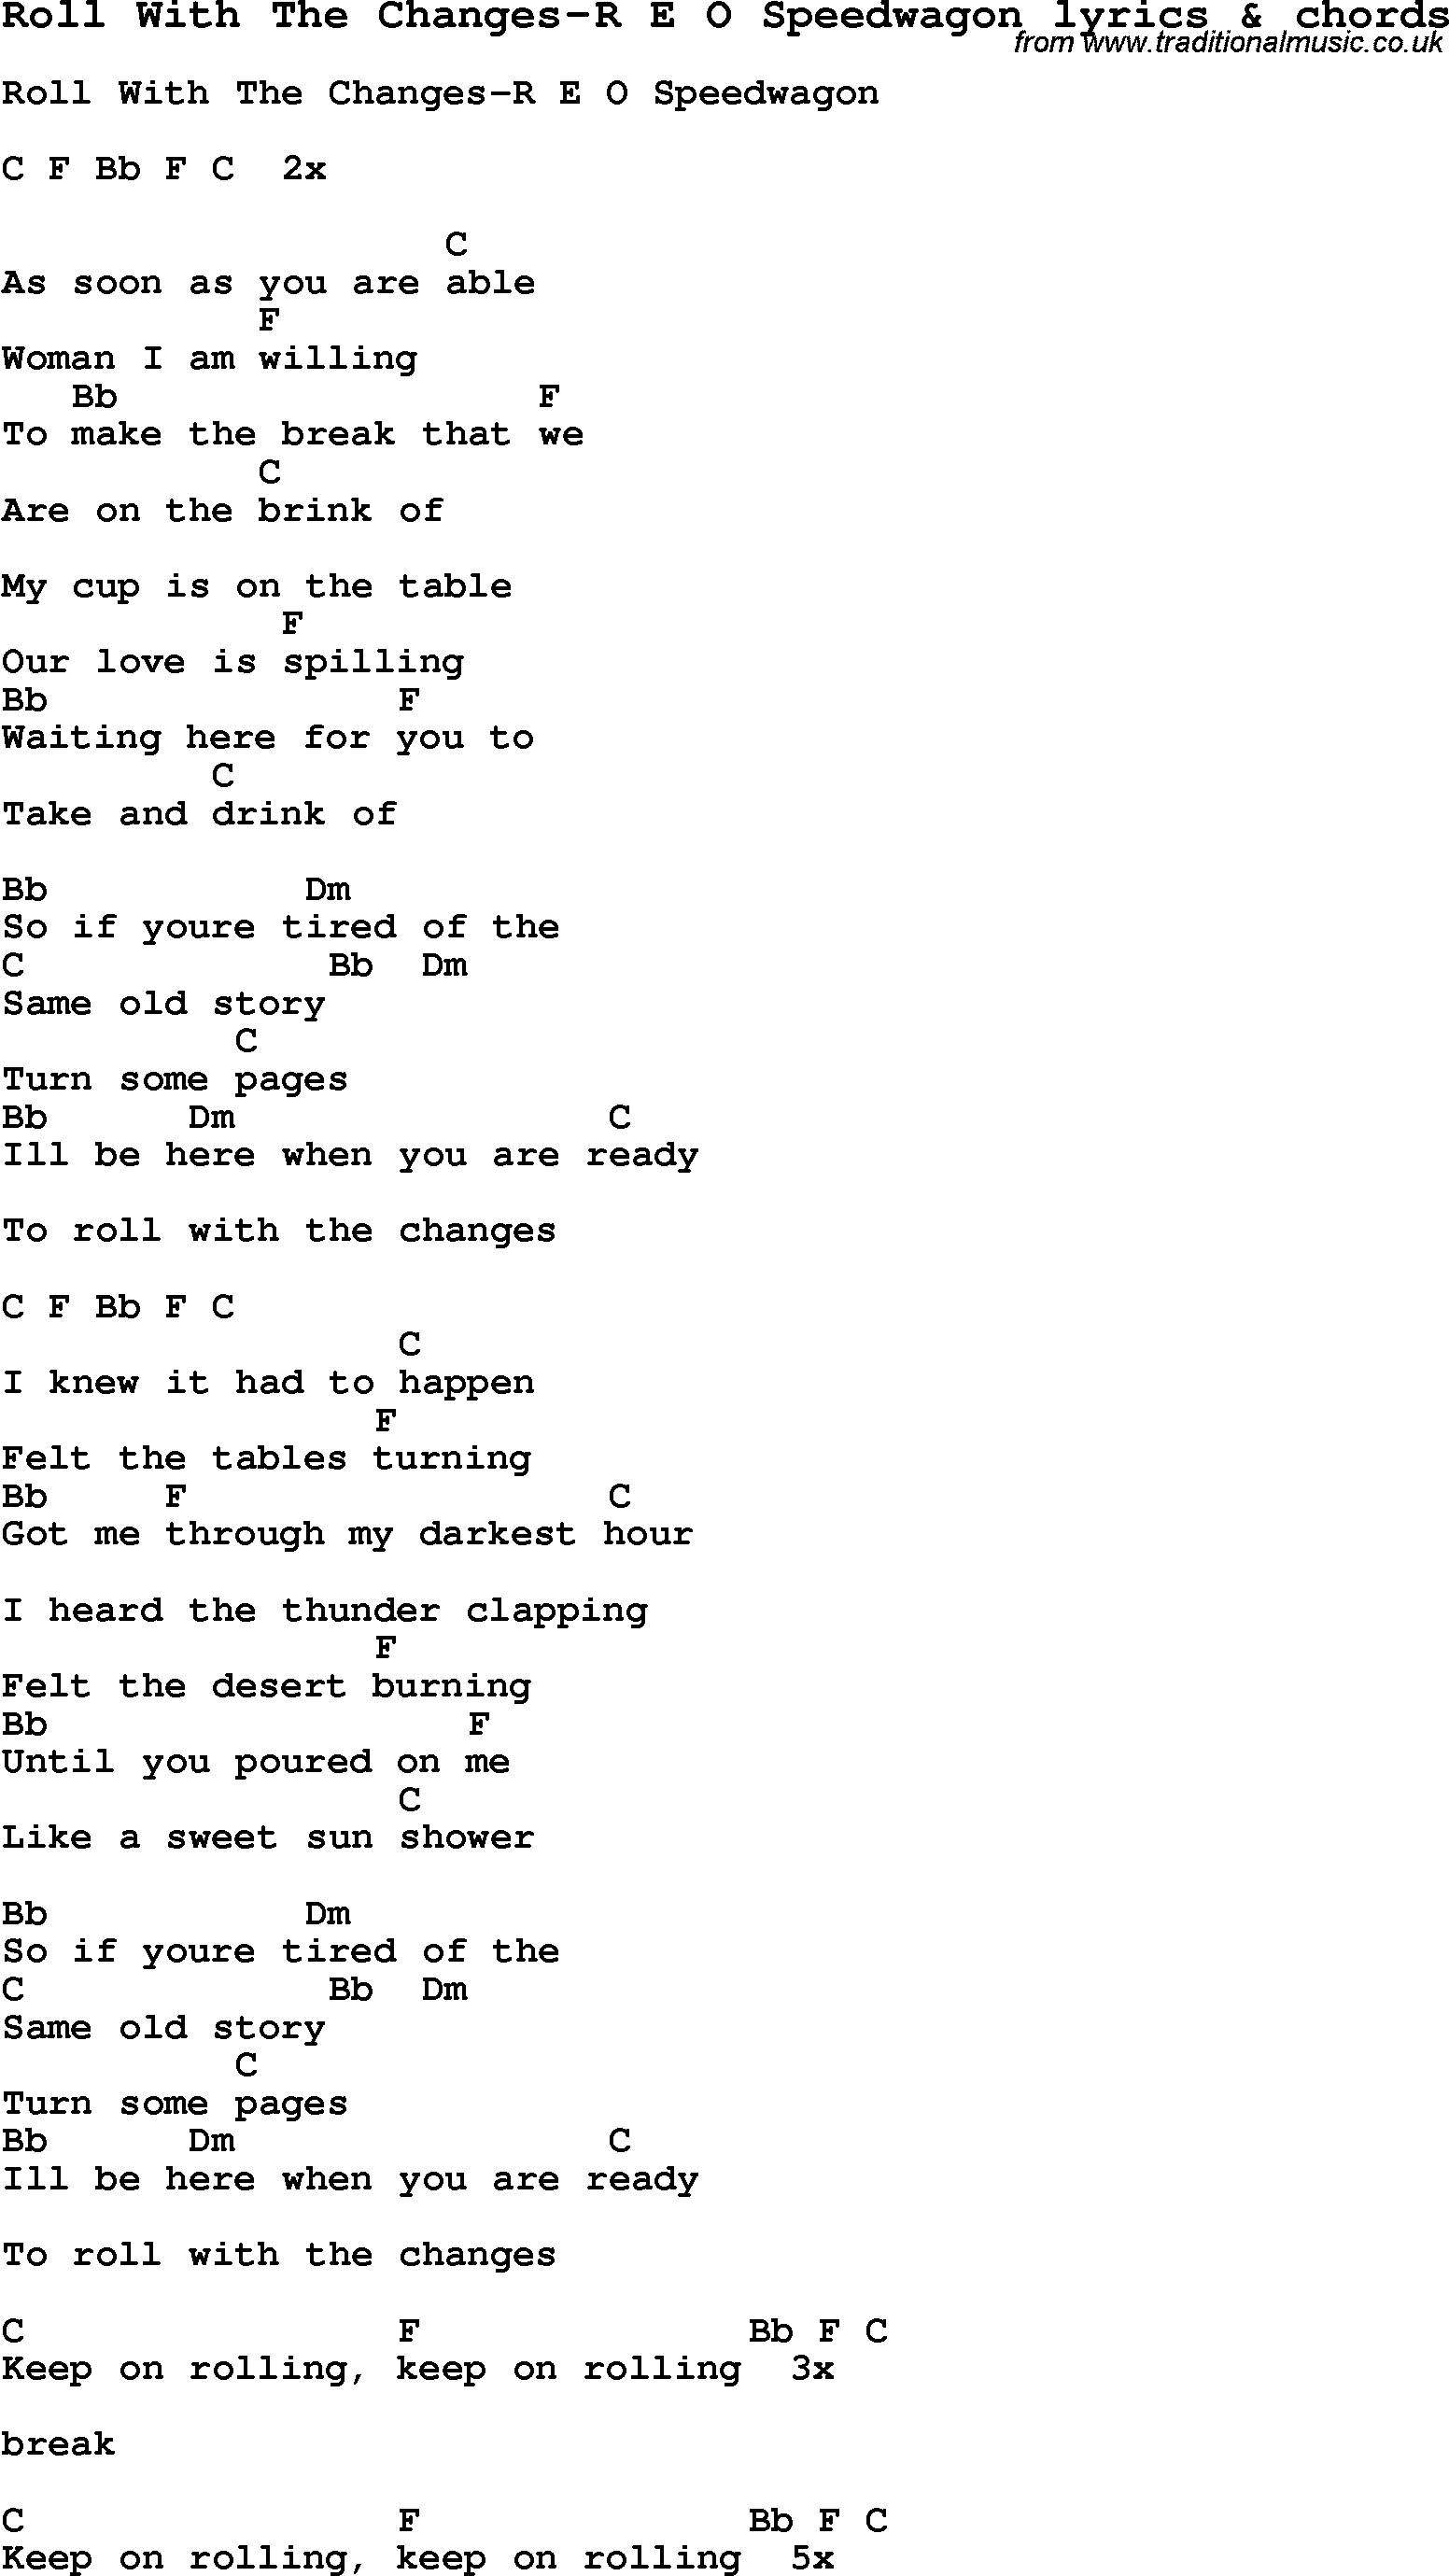 Love Song Lyrics for: Roll With The Changes-R E O Speedwagon with chords for Ukulele, Guitar Banjo etc.